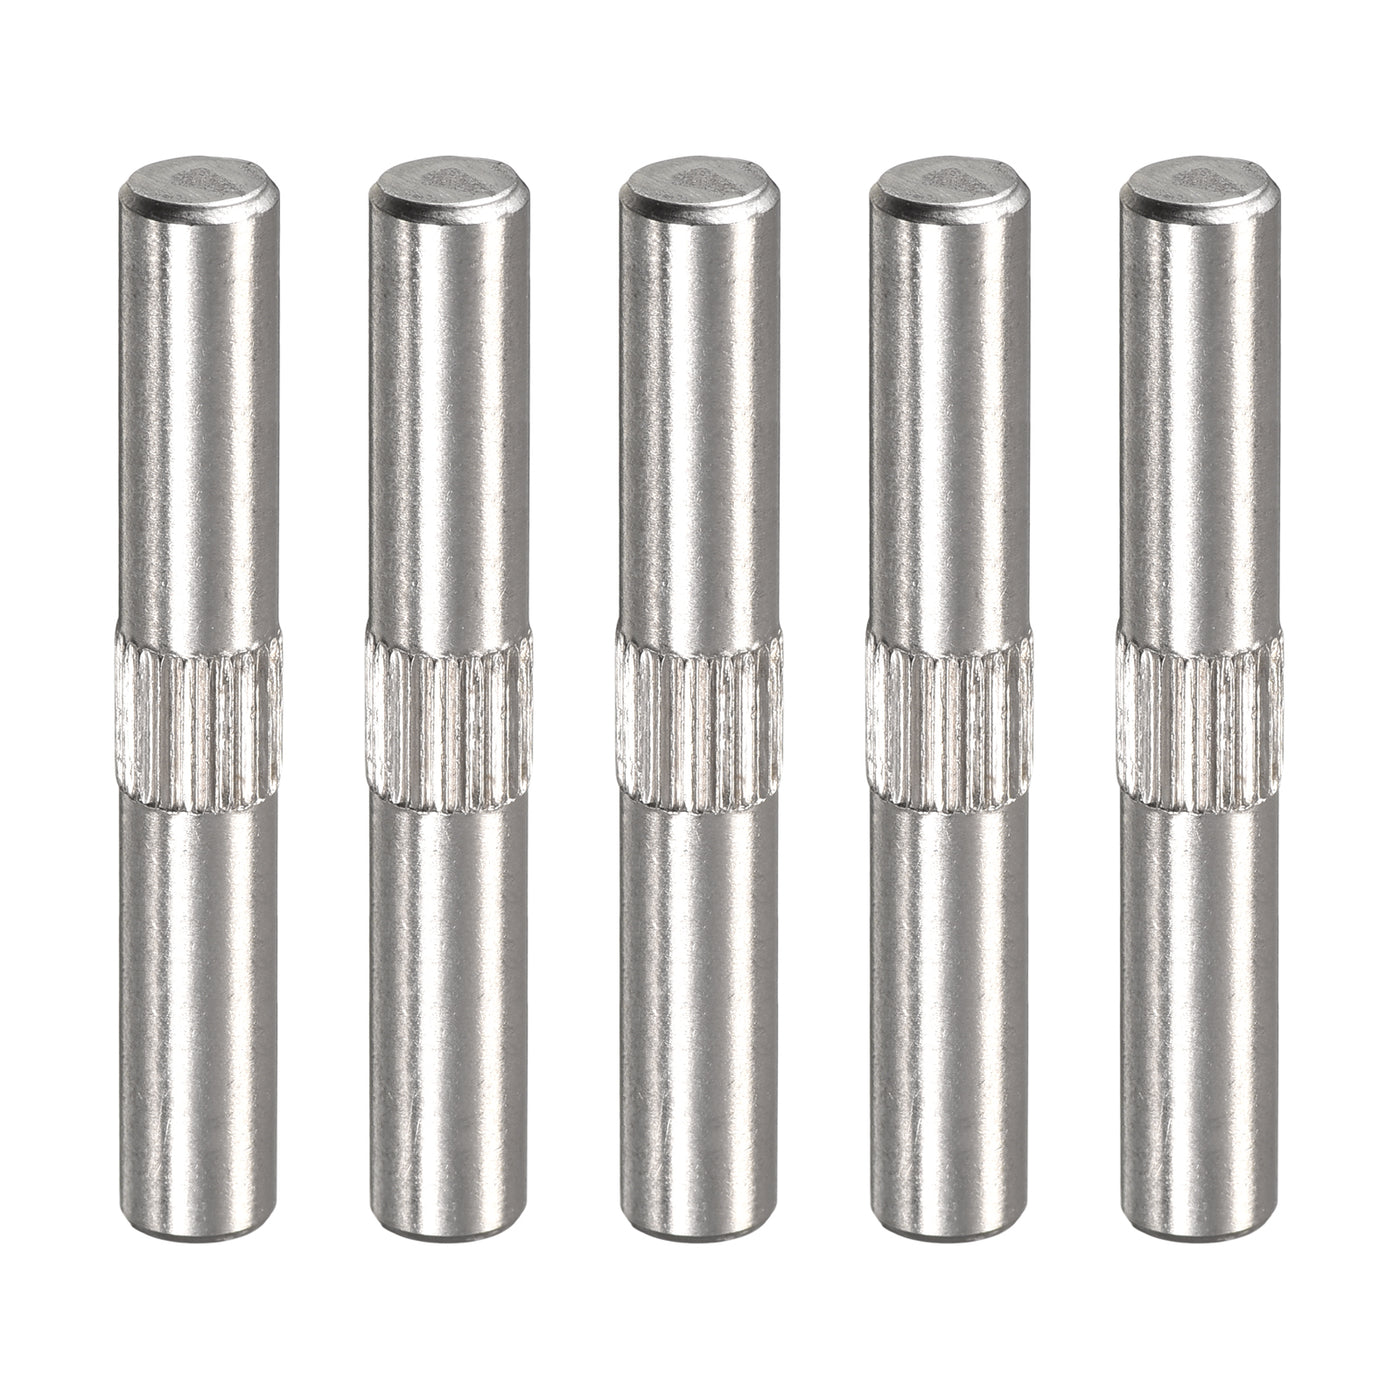 uxcell Uxcell 5x40mm 304 Stainless Steel Dowel Pins, 5Pcs Center Knurled Chamfered End Pin